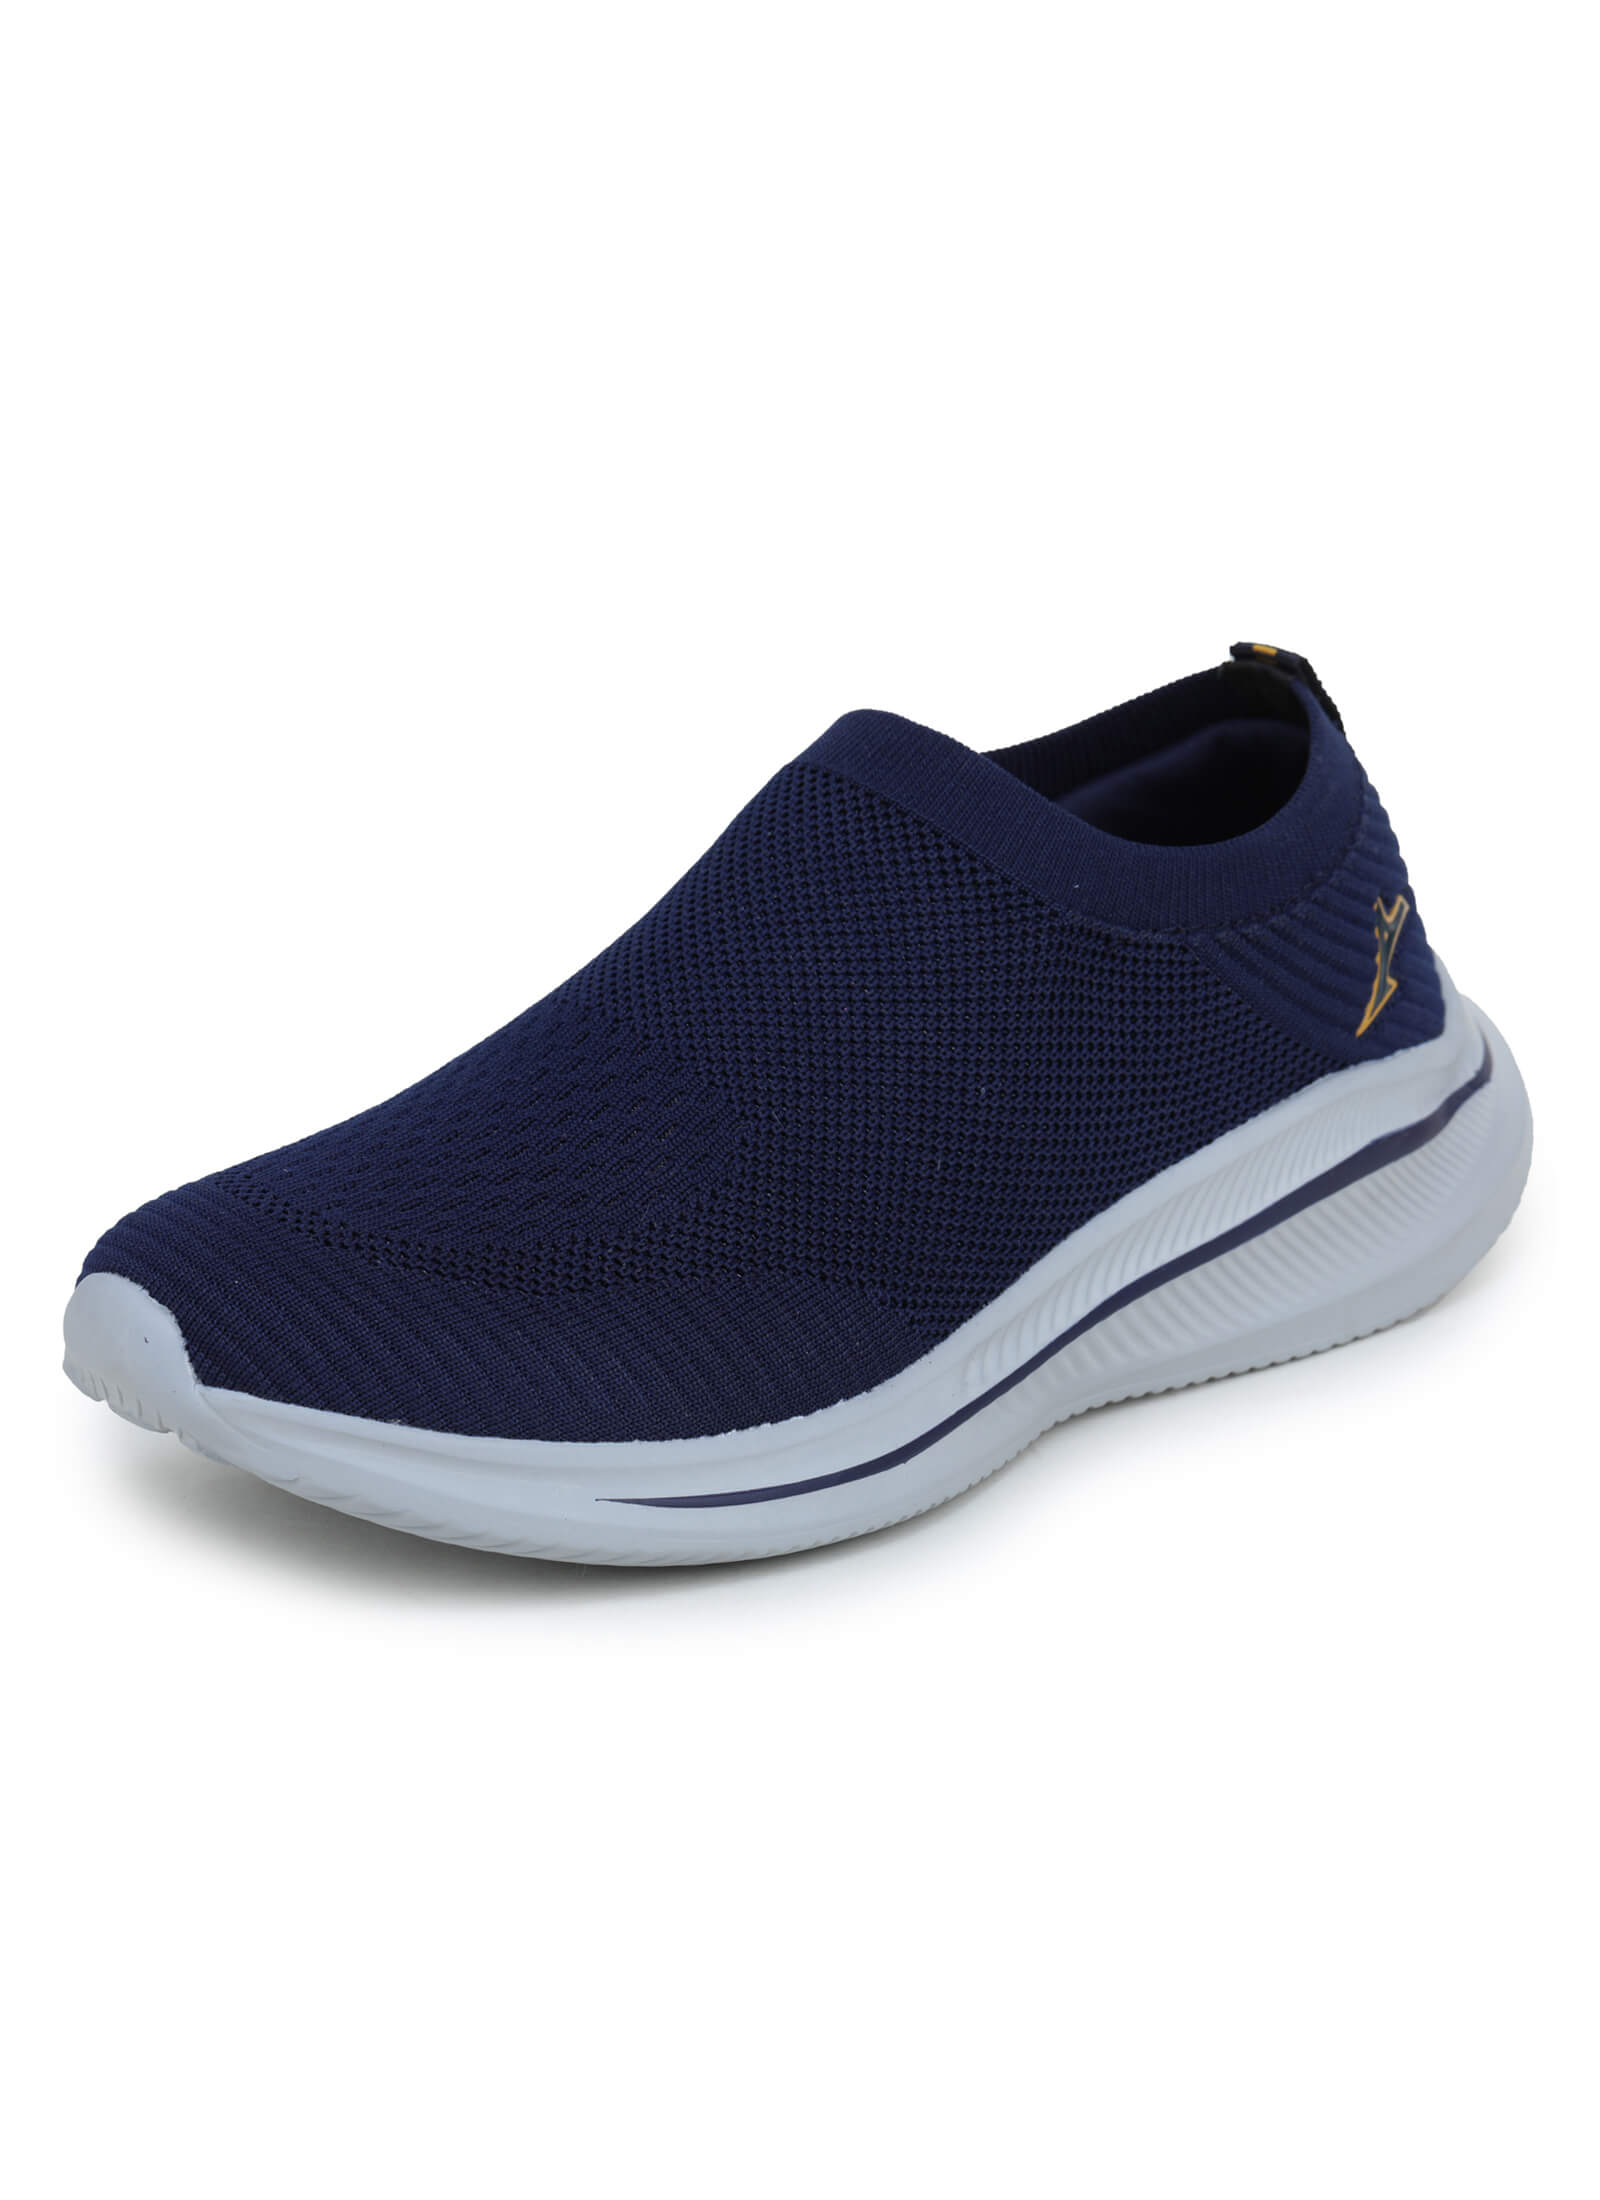 Bairstow-3 Anti-Skid Sports Shoes For Men